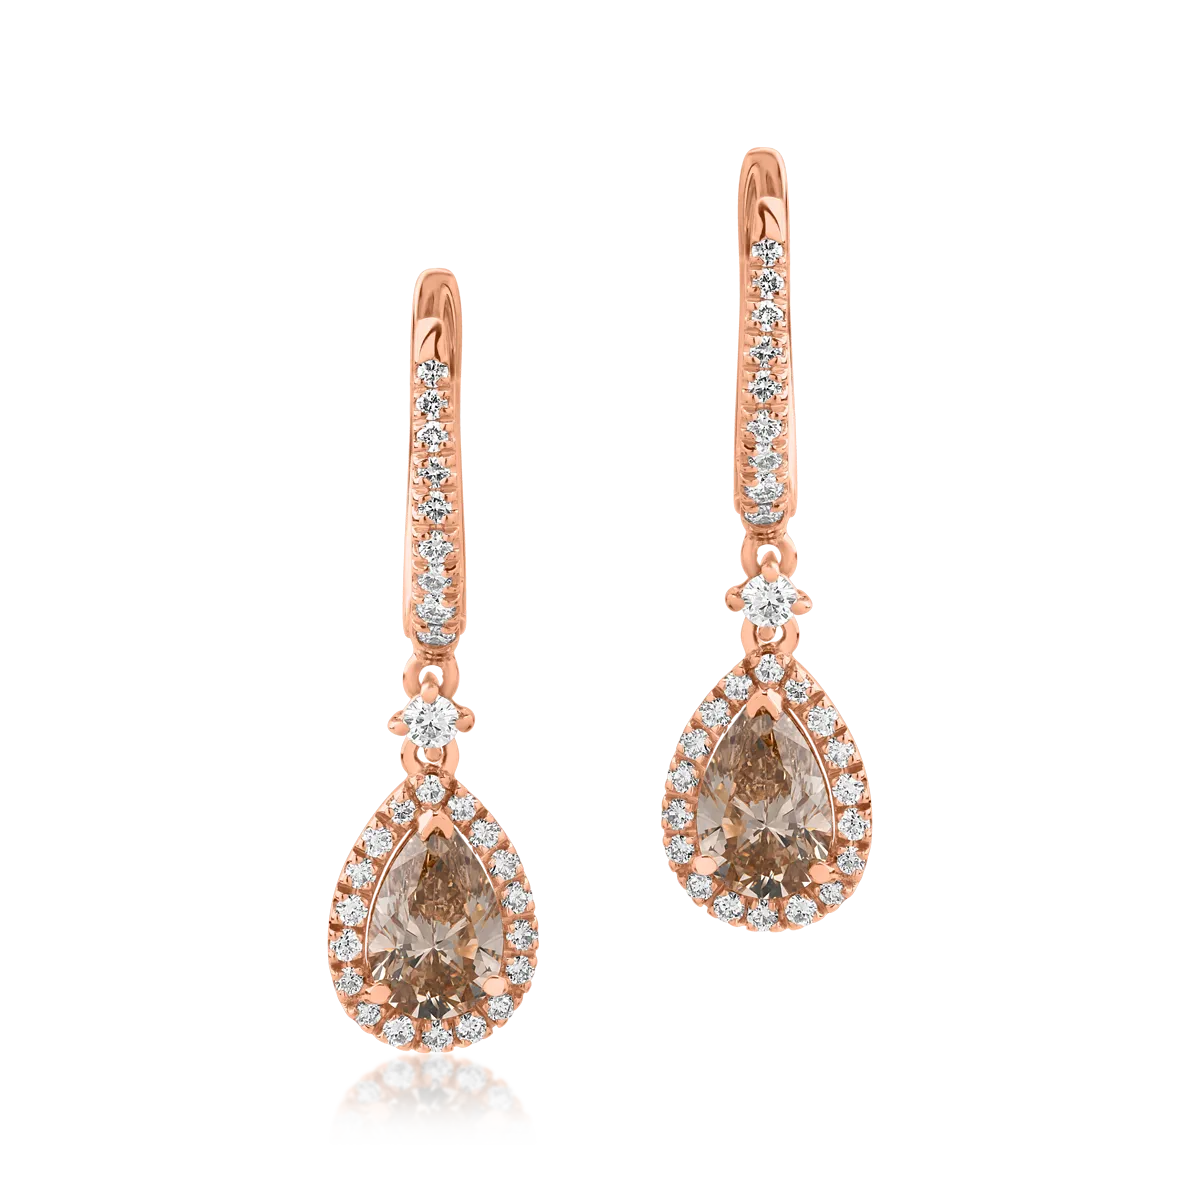 18K rose gold earrings with 1.15ct brown diamonds and 0.42ct diamonds